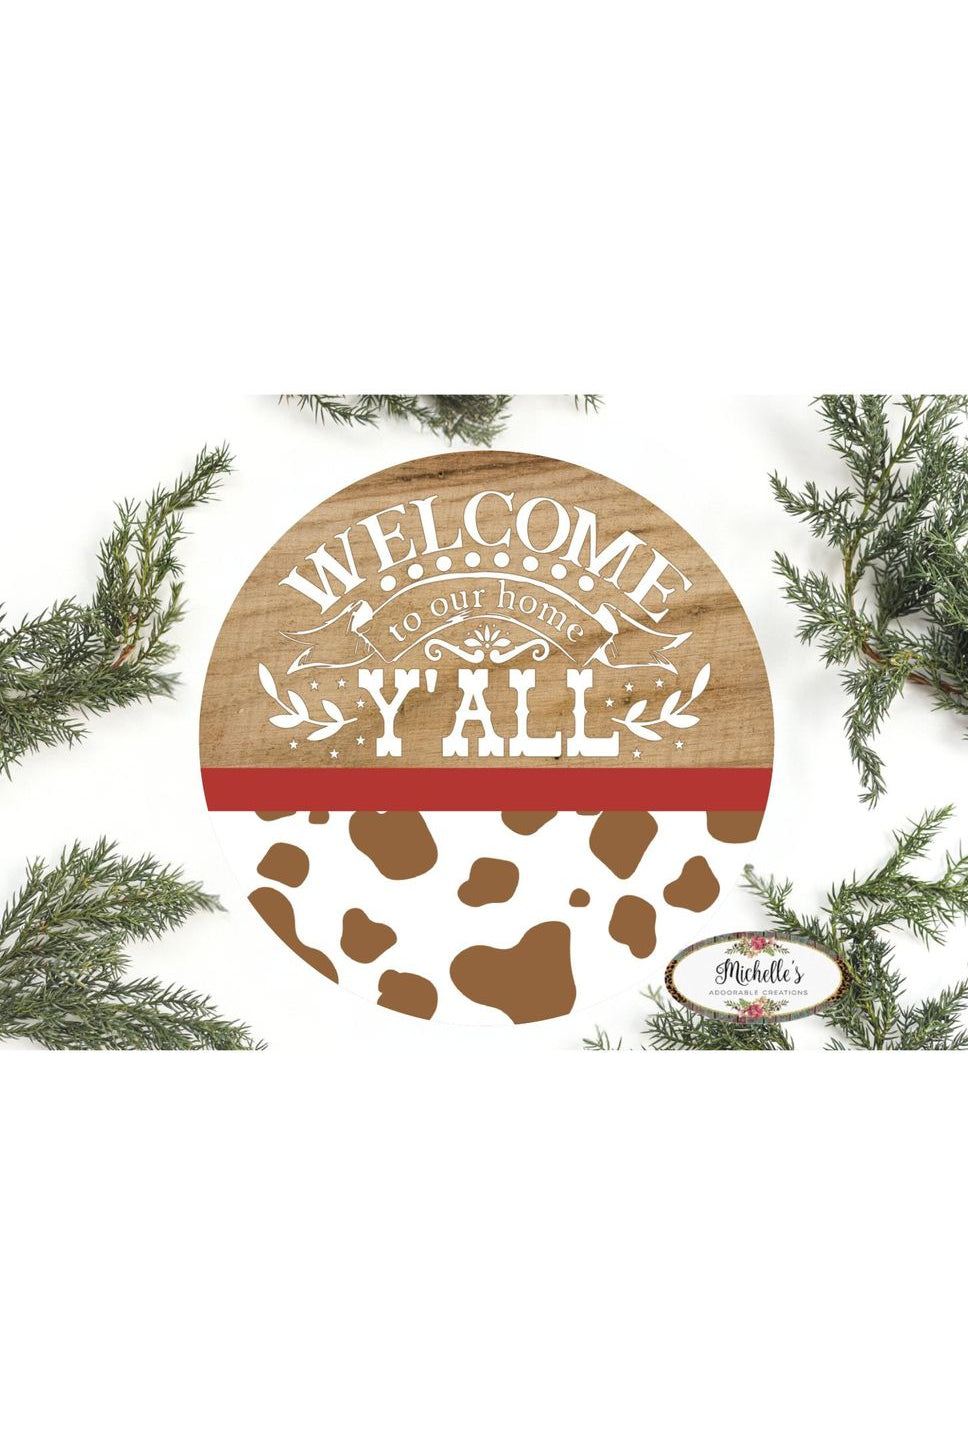 Shop For Welcome To Our Home Yall Brown Cow Sign - Wreath Enhancement